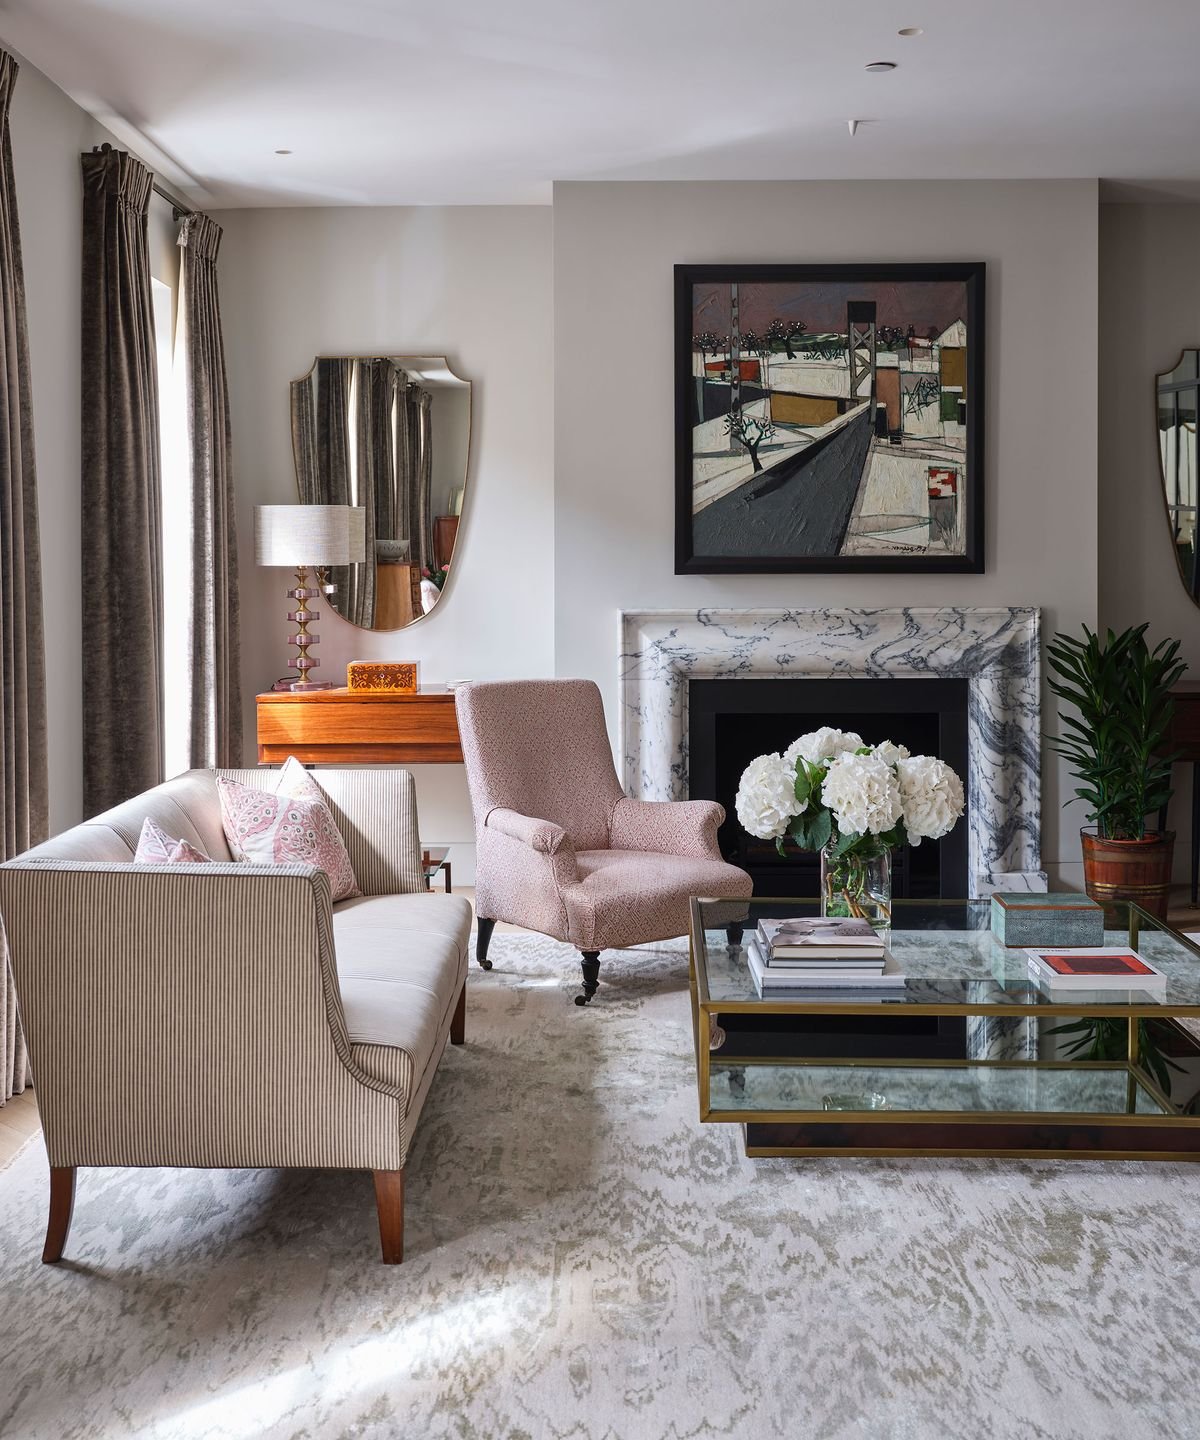 Neutral room ideas – 15 ways to use timeless shades